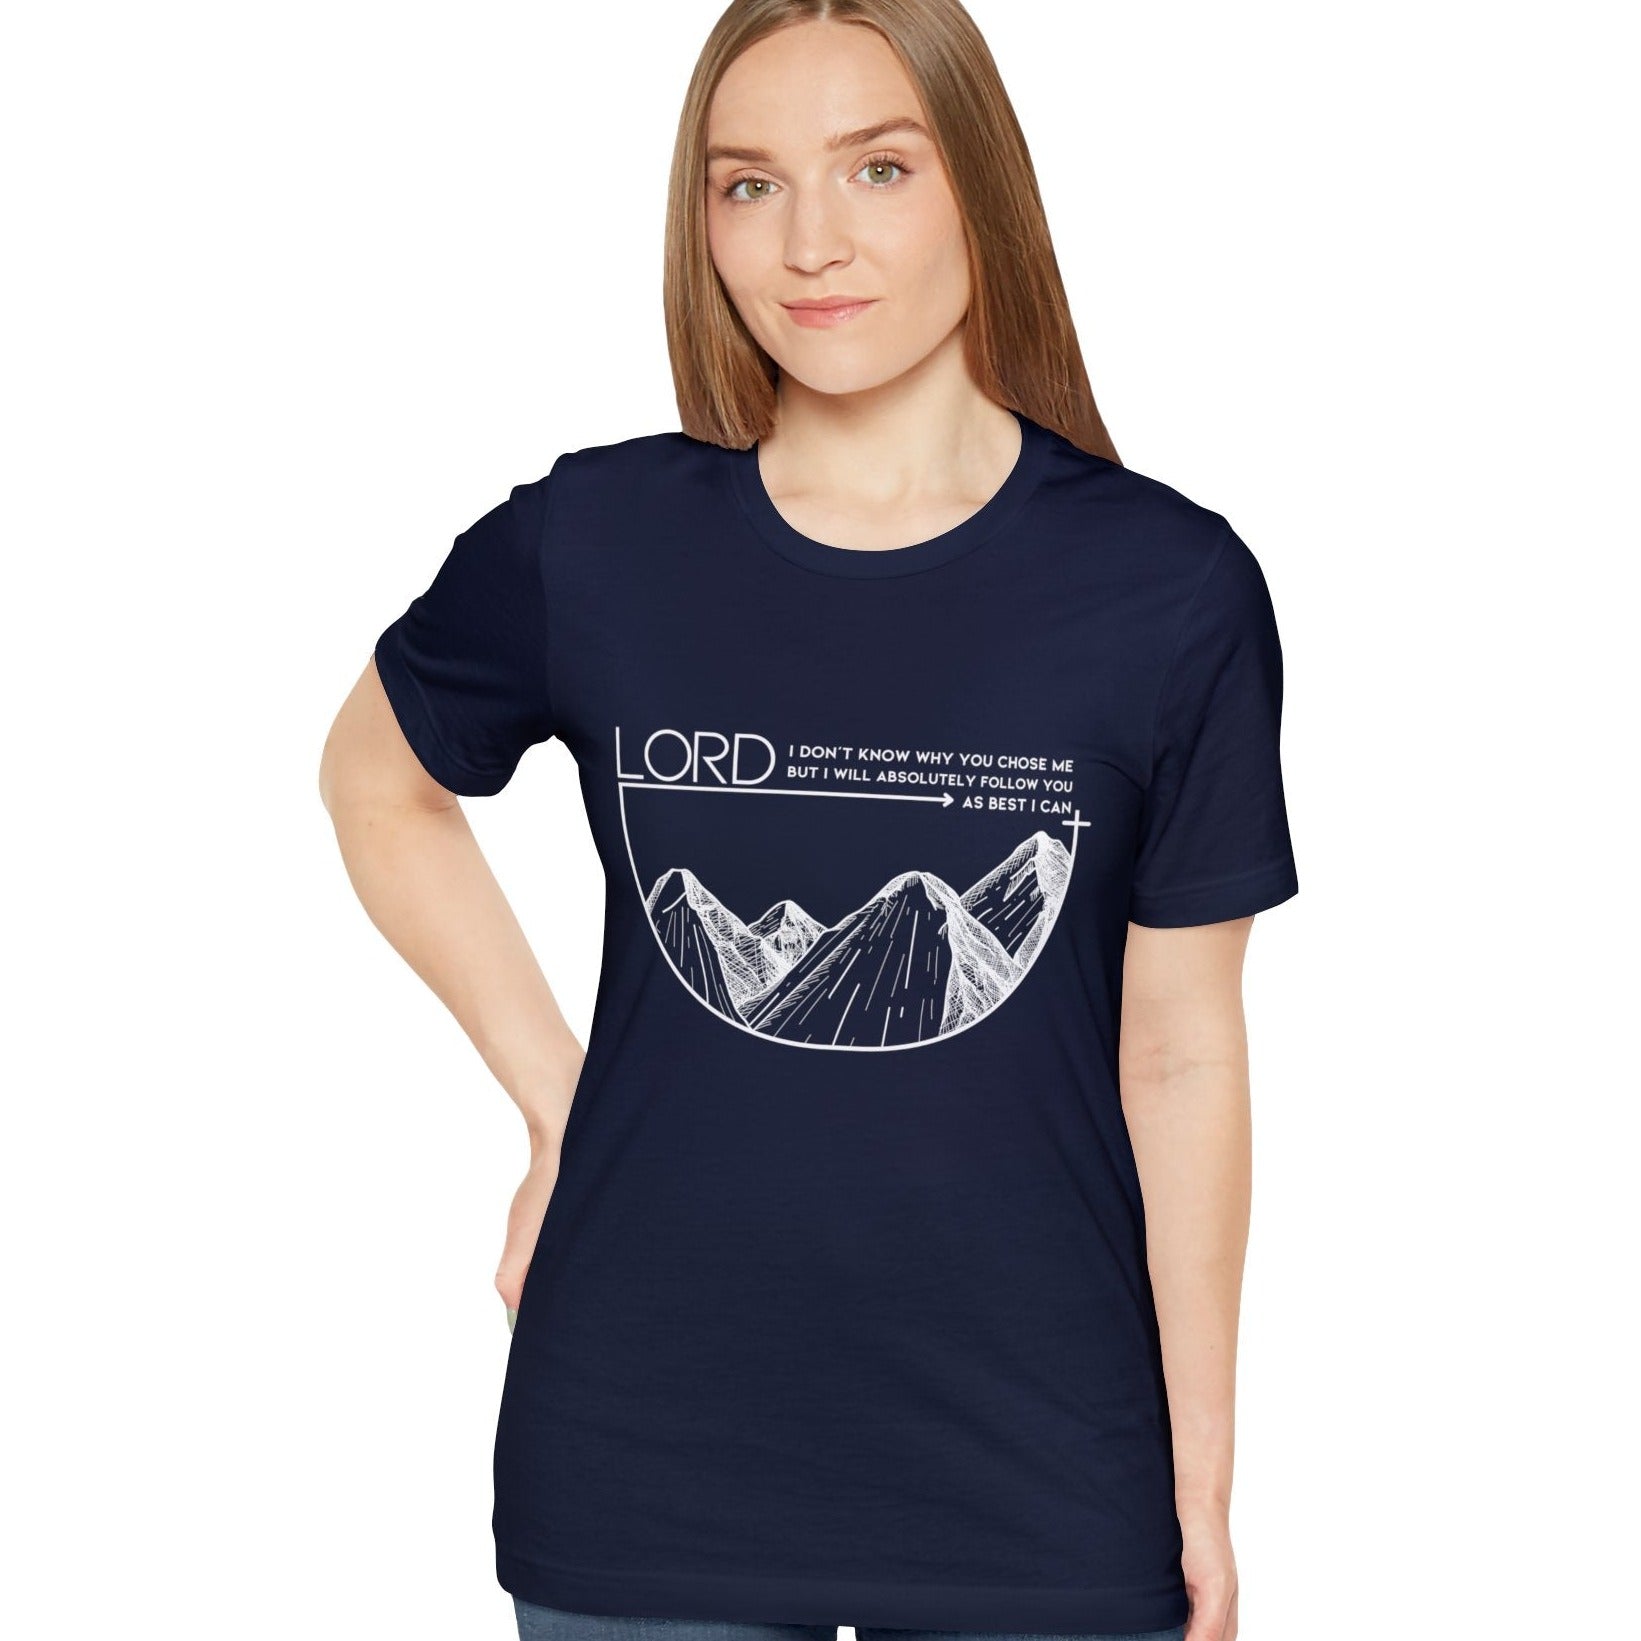 Follow the Lord, Express Delivery, Christian T-shirt for Men and Women navy